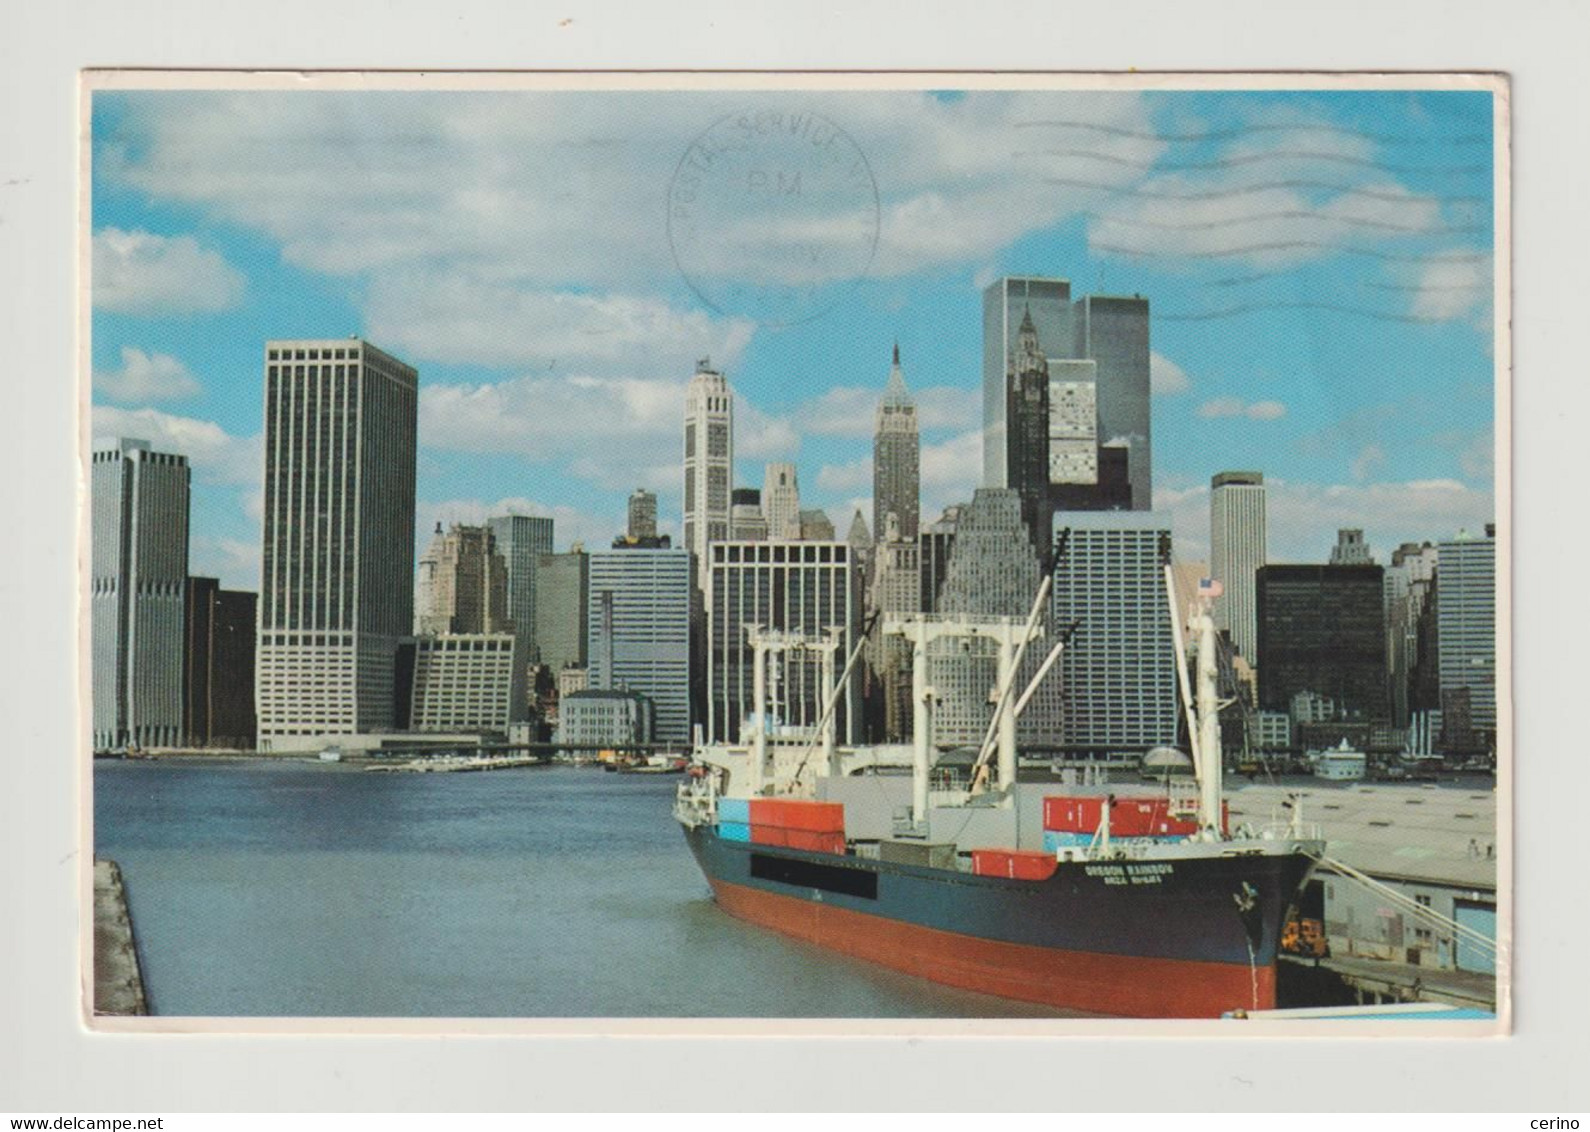 NEW  YORK  CITY:  OCEAN  FREIGHTER  DOCKED  AT  A  BROOKLYN  PIER ...-  STAMP  REMOVED  -  TO  ITALY  -  FG - Ponti E Gallerie